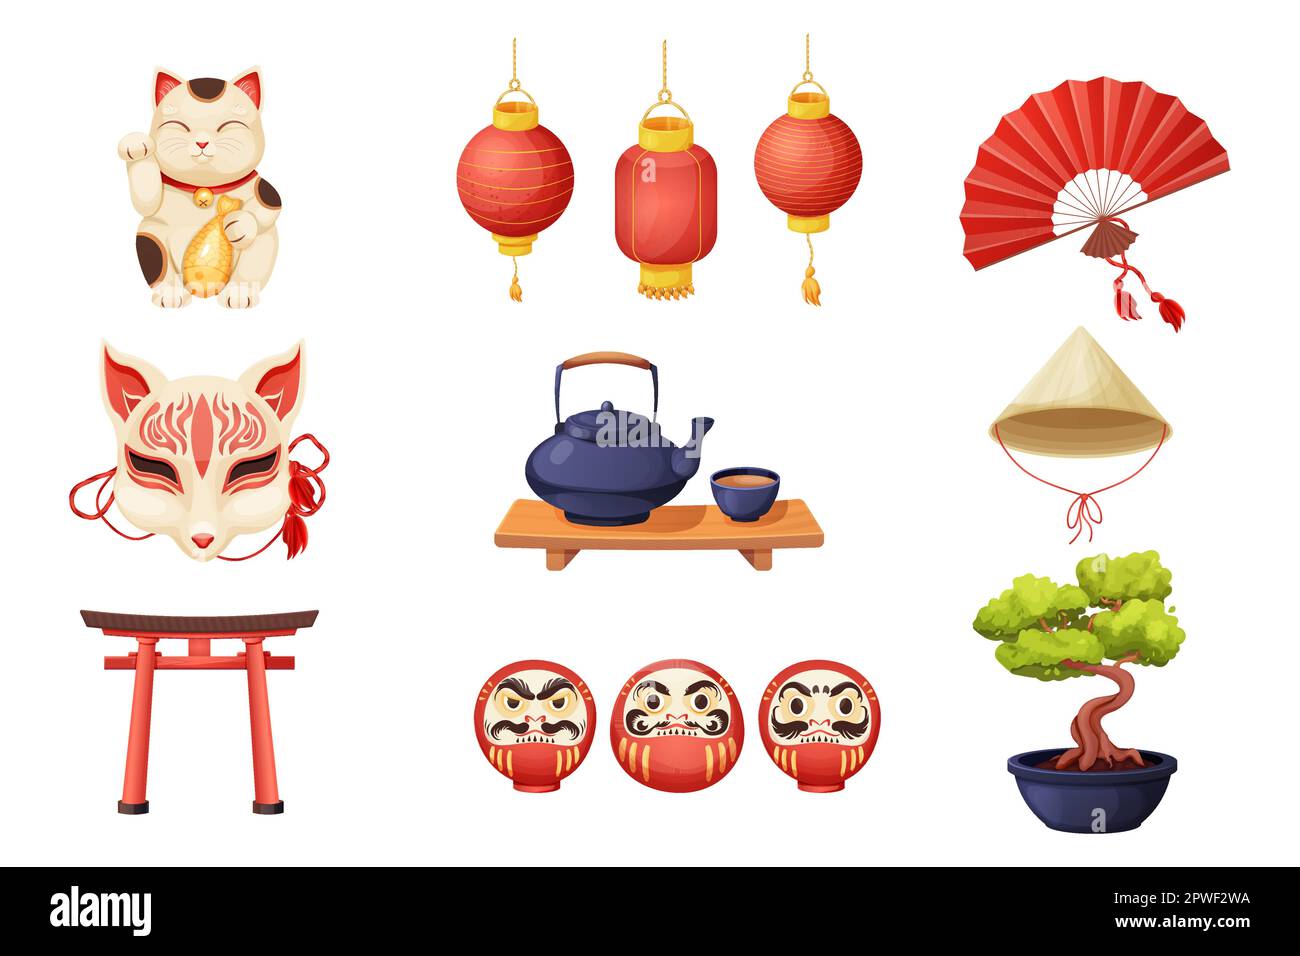 Set japanese kitsune mask, maneki neko cat, daruma doll with faces, kettle or teapot with cup on wooden table, hand fun, torii gate and conical bamboo hat in cartoon style isolated on white background. Vector illustration Stock Vector